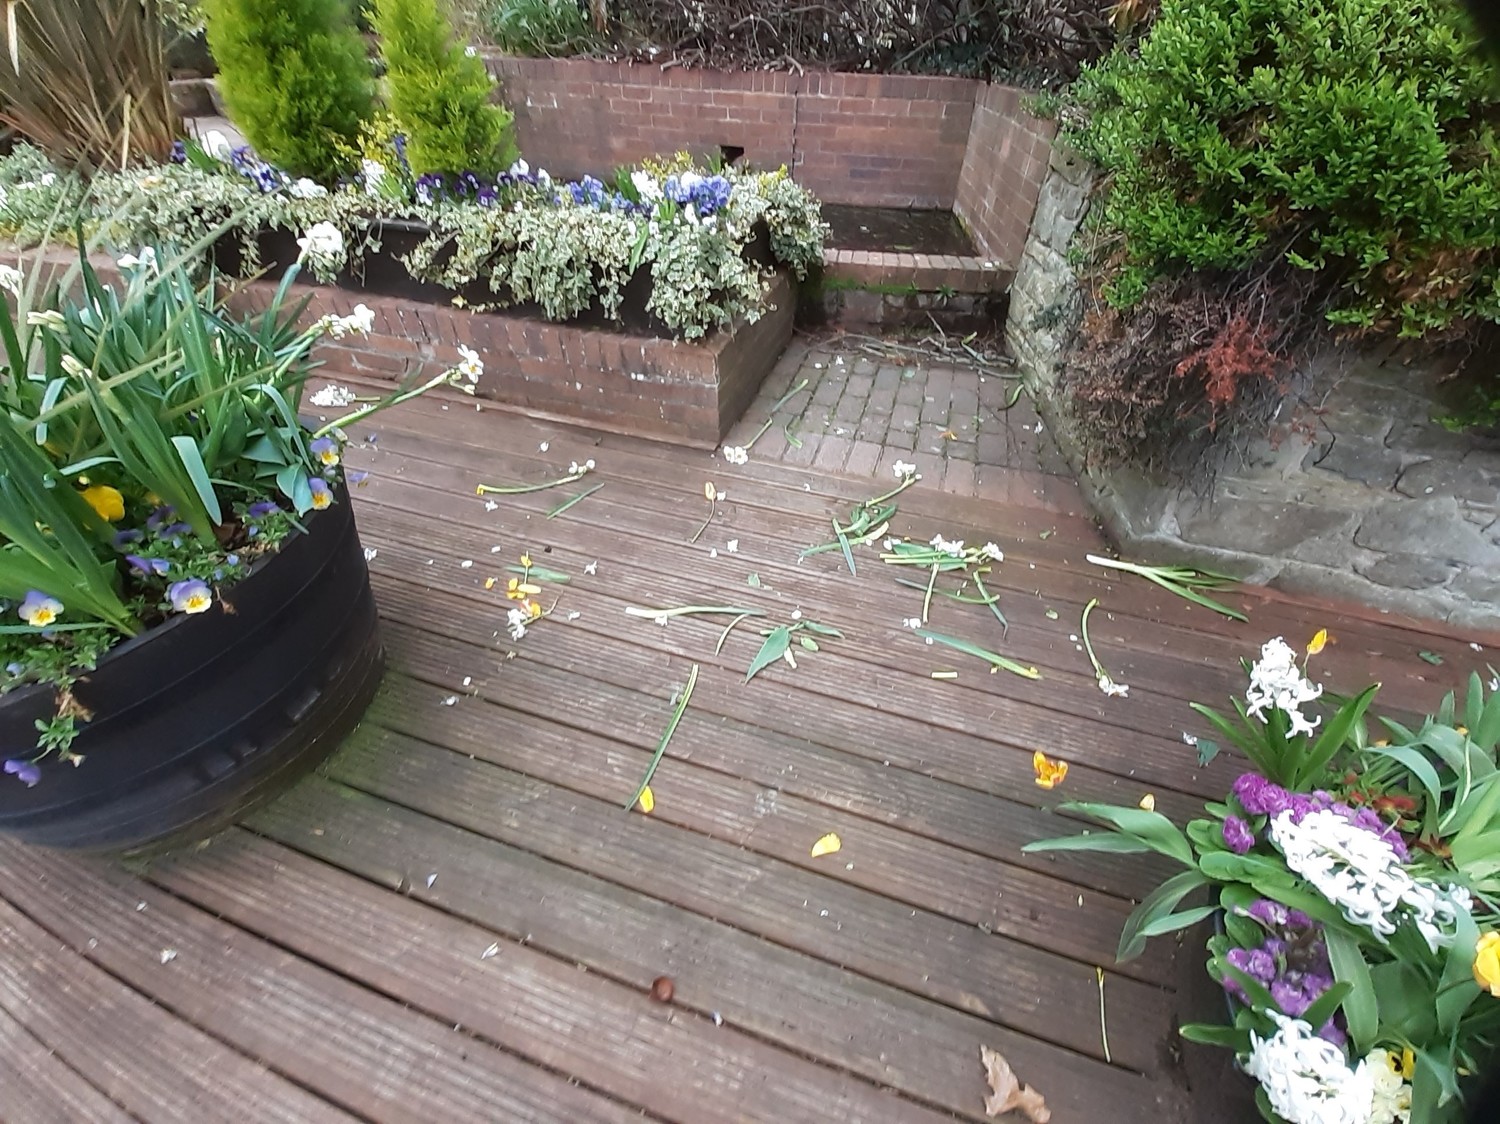 Damage to floral planters in the Dingle